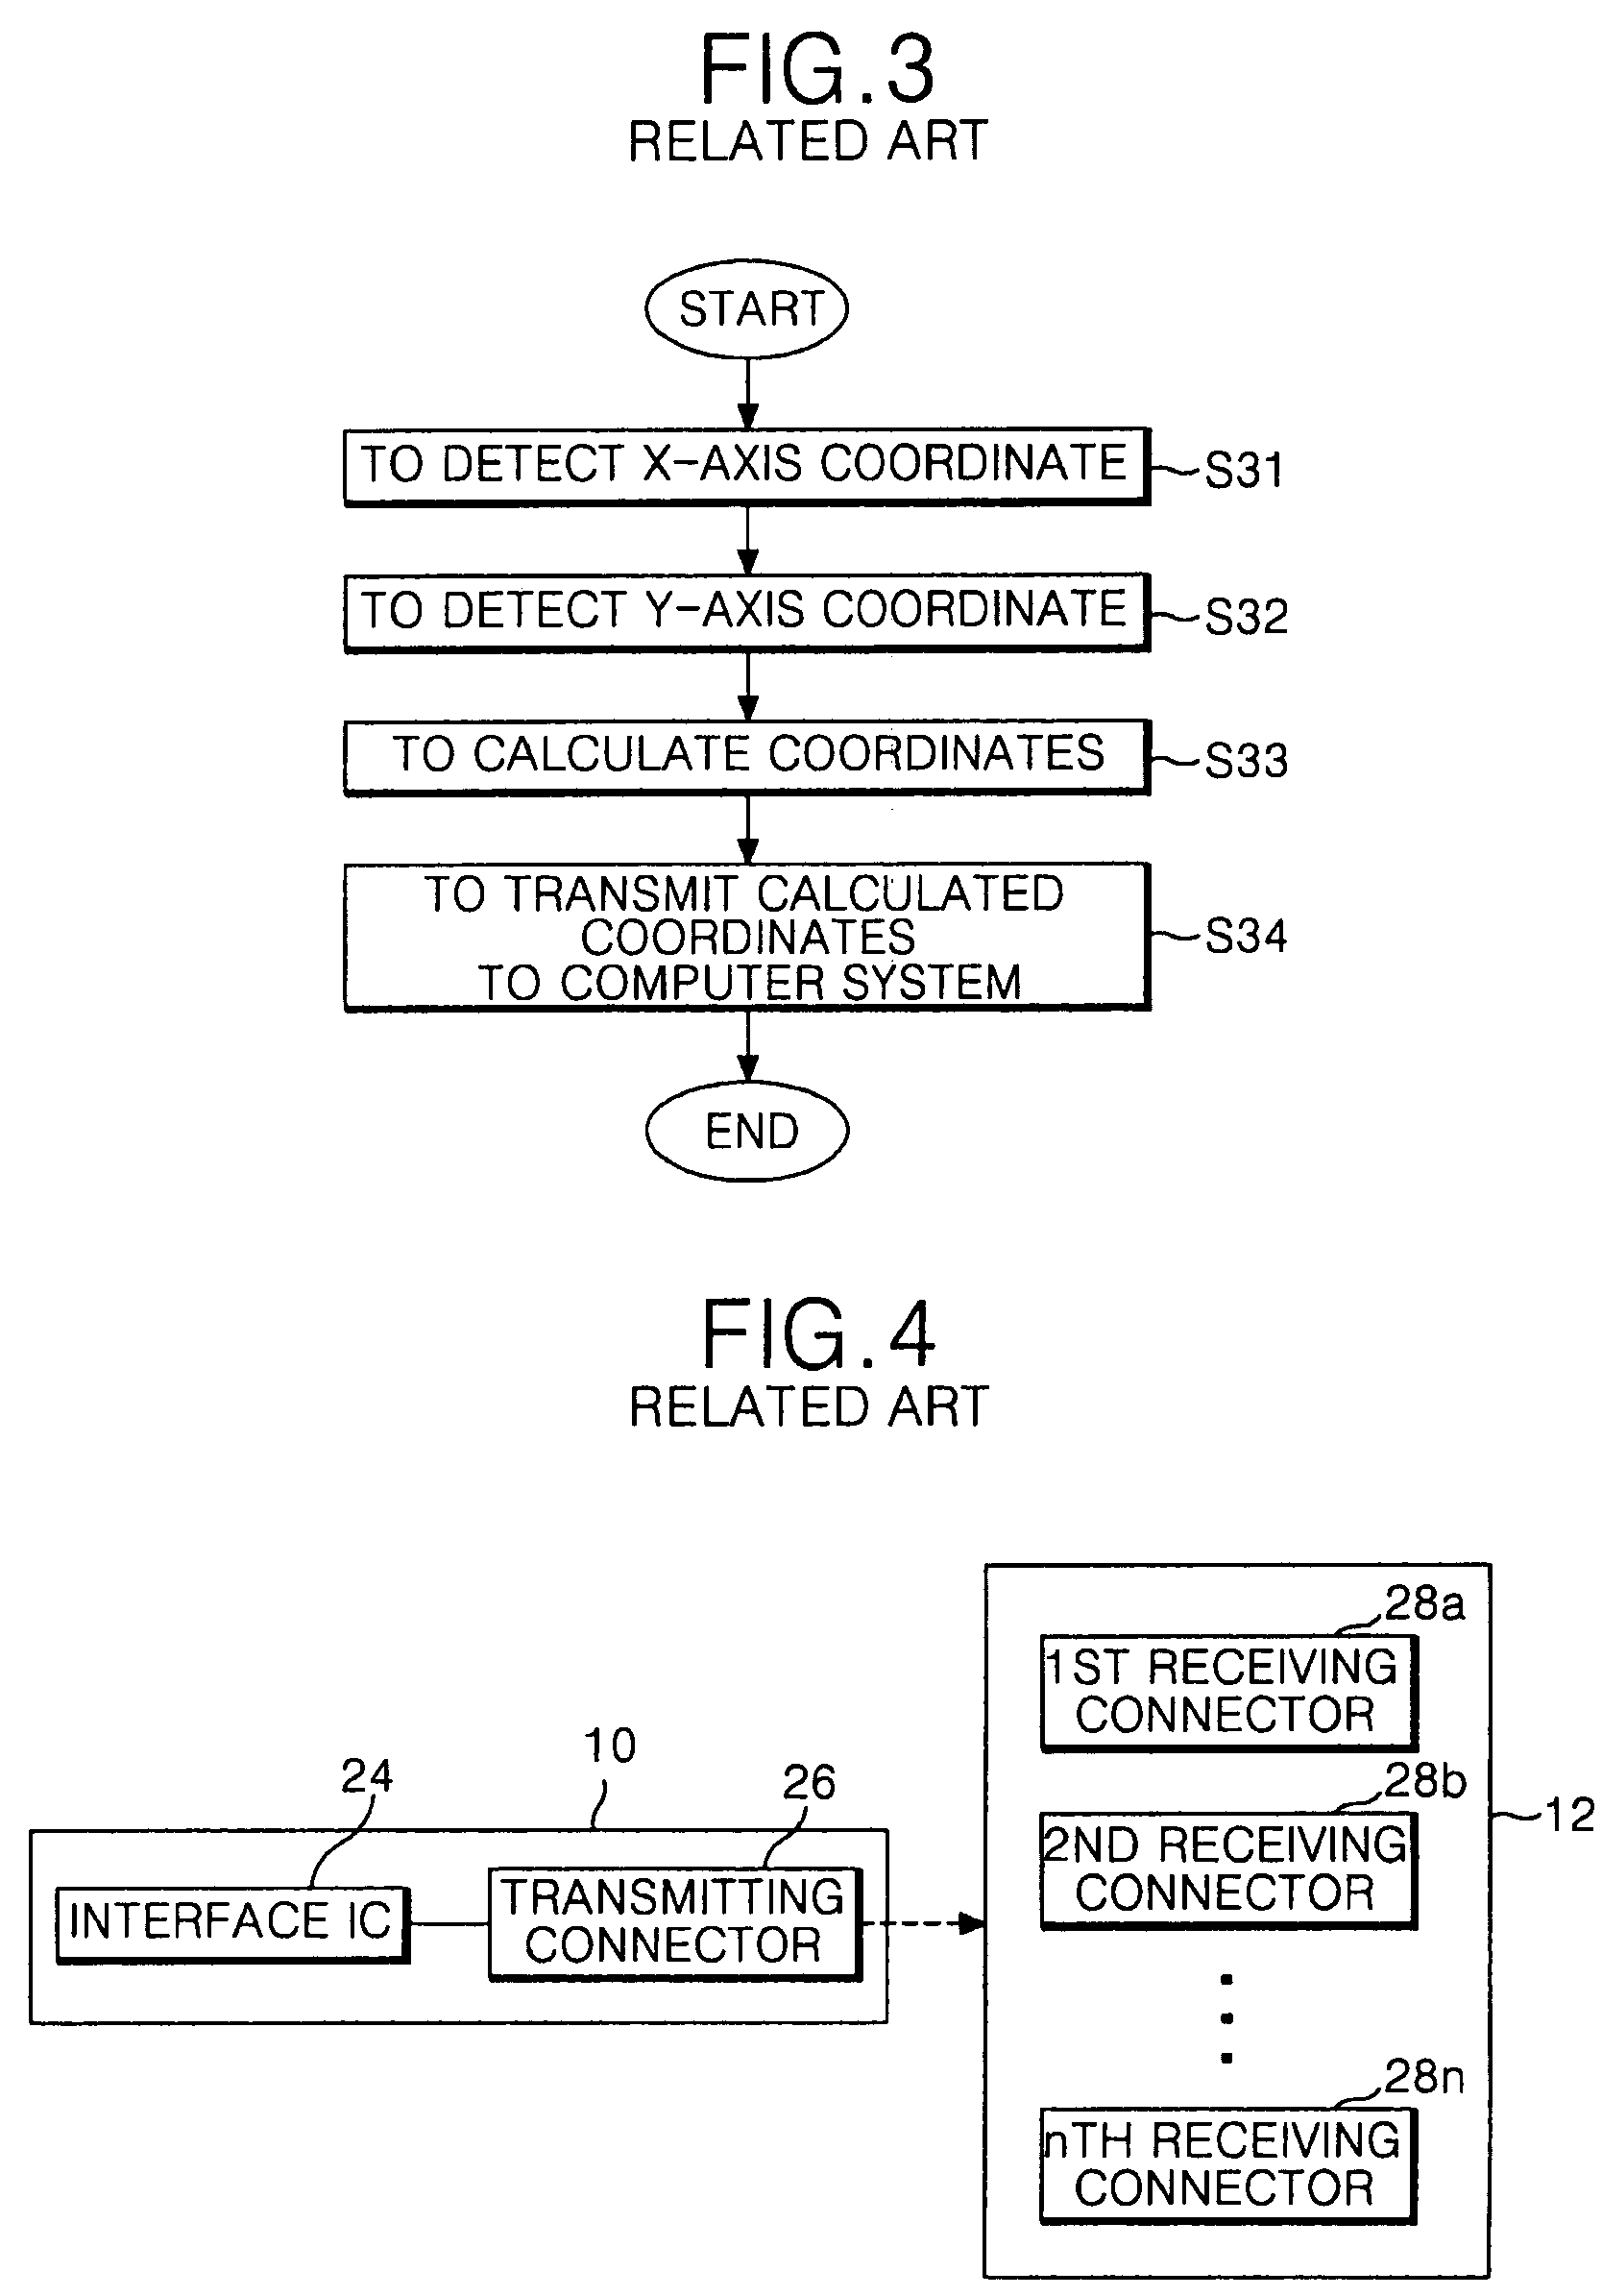 Apparatus and method for driving touch panel device